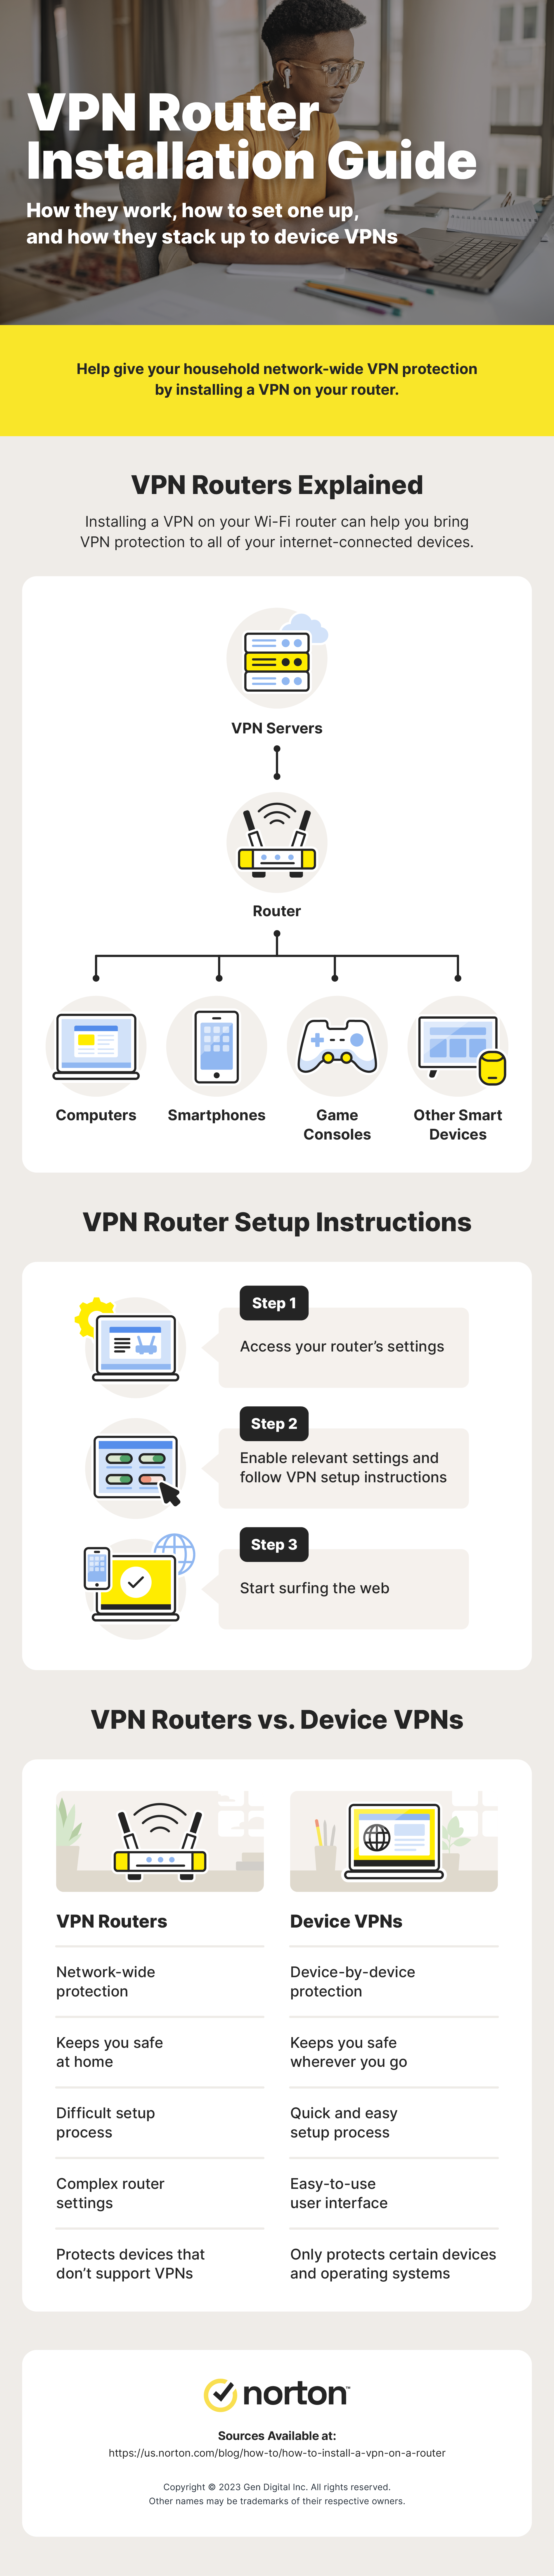 An infographic showcases how to install a VPN on a router, how they work, and how they differ from device VPNs.